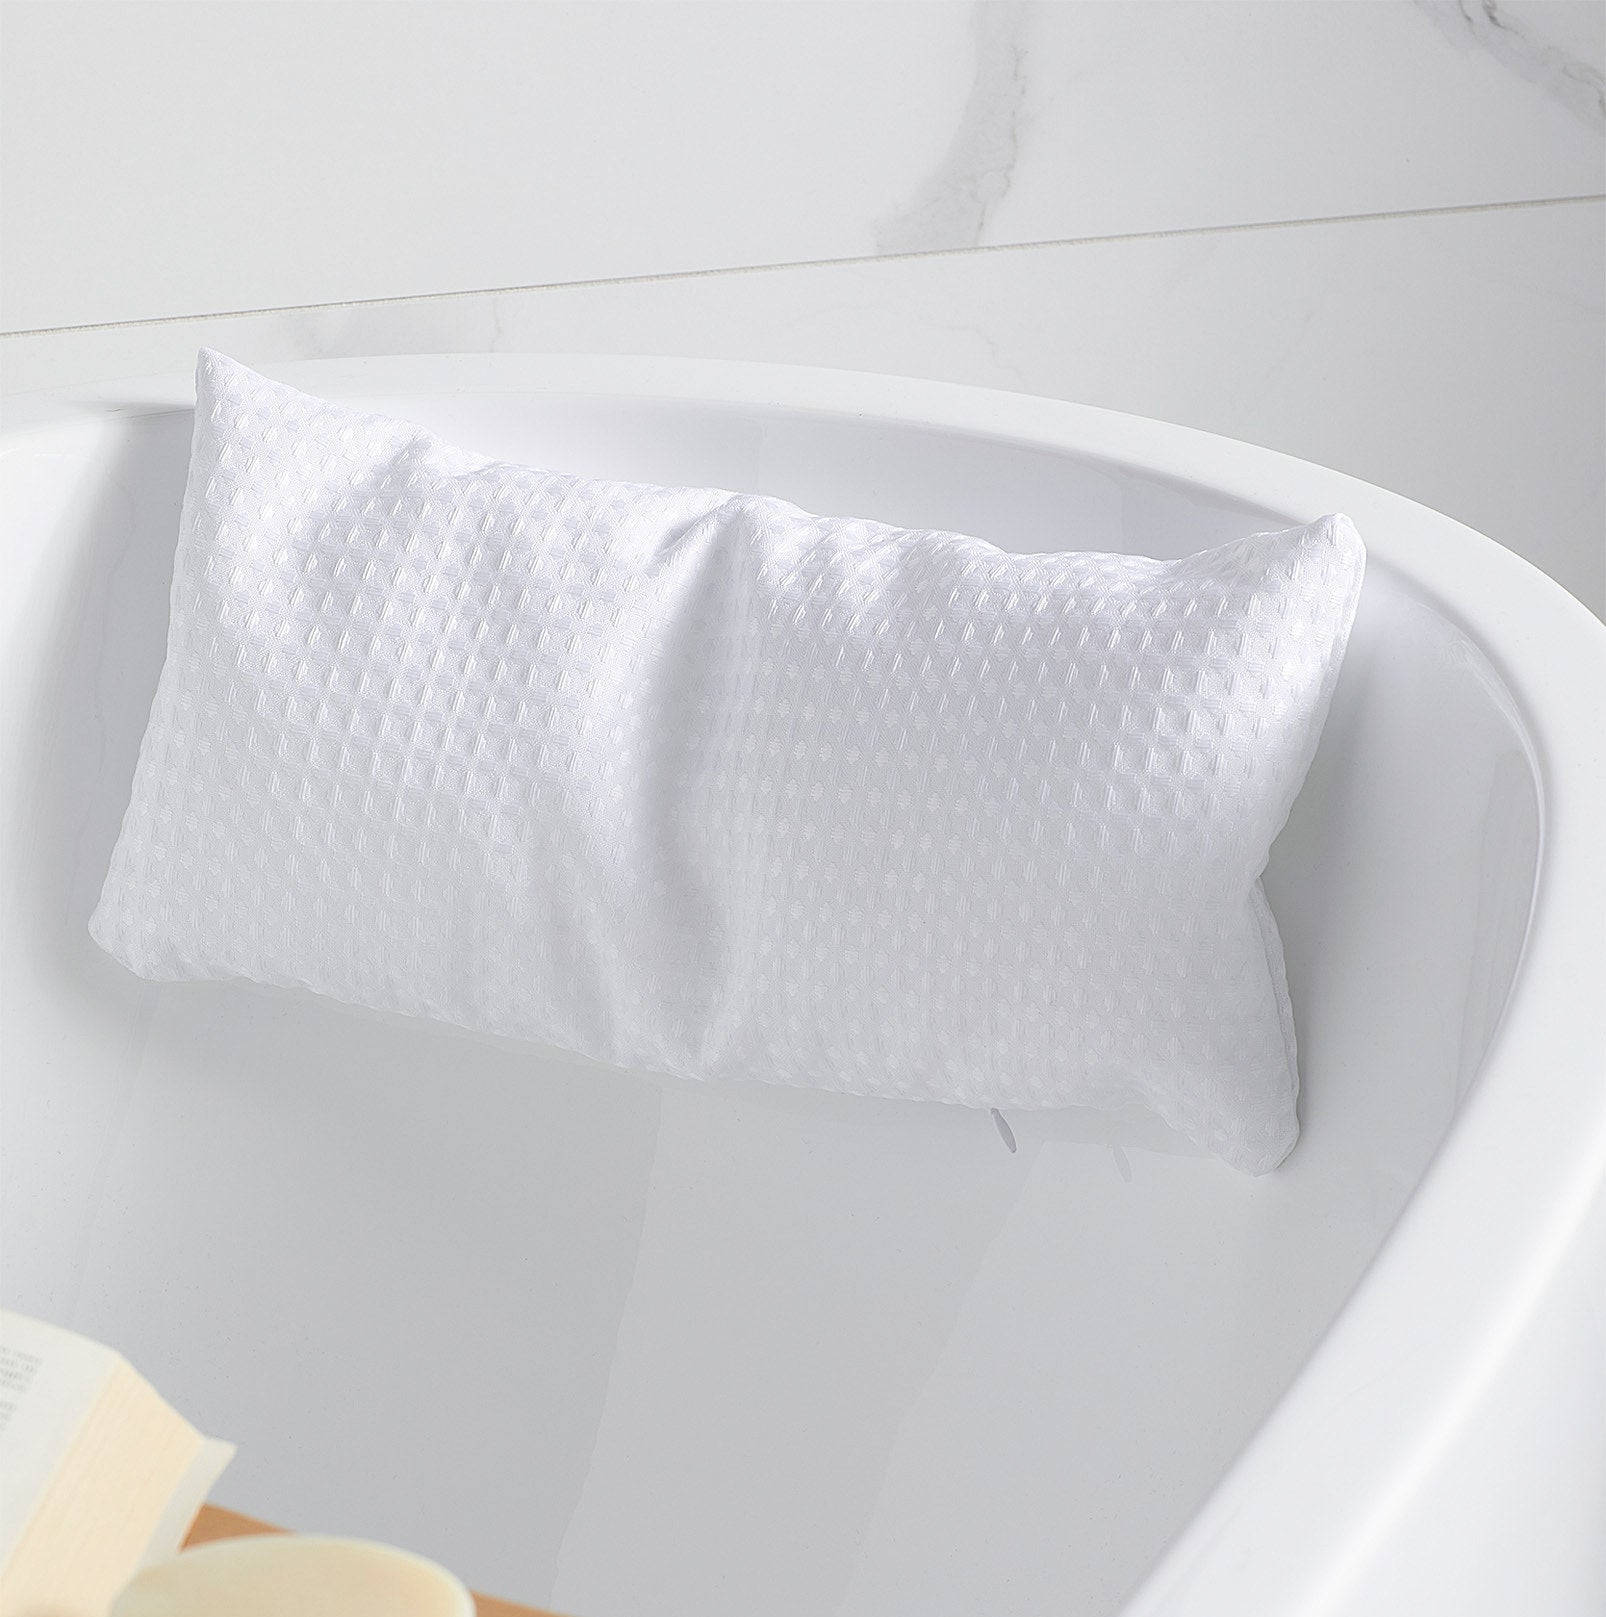 The pillow attached to the back of the bath tub